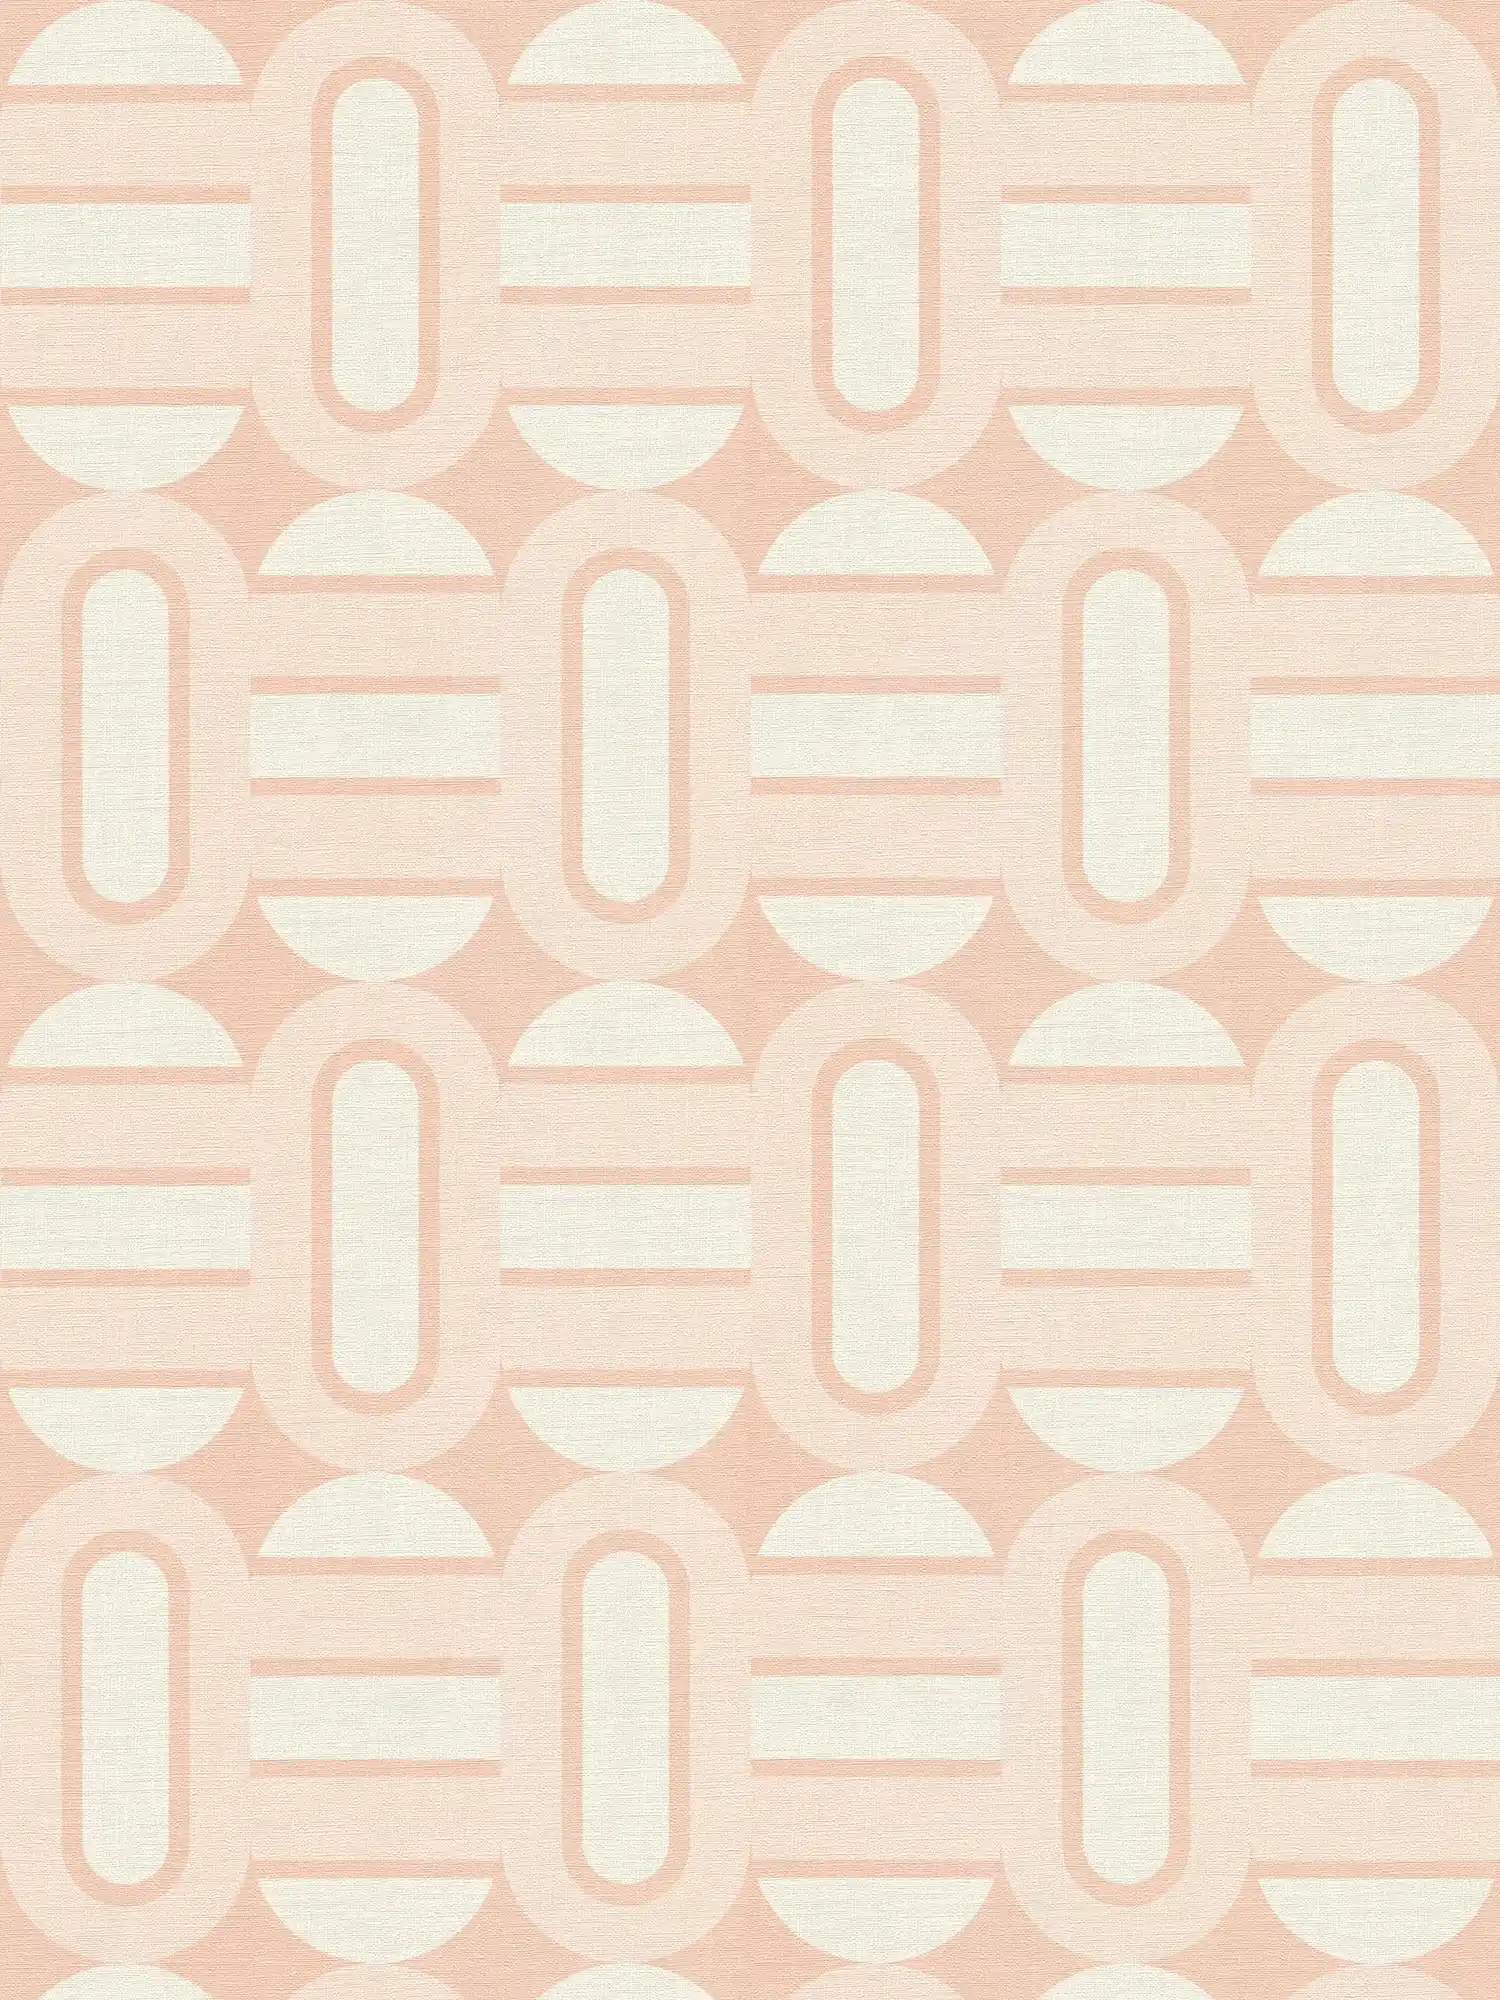 Soft Pink Tones in Retro Pattern with Ovals and Bars - Beige, Cream, Pink
